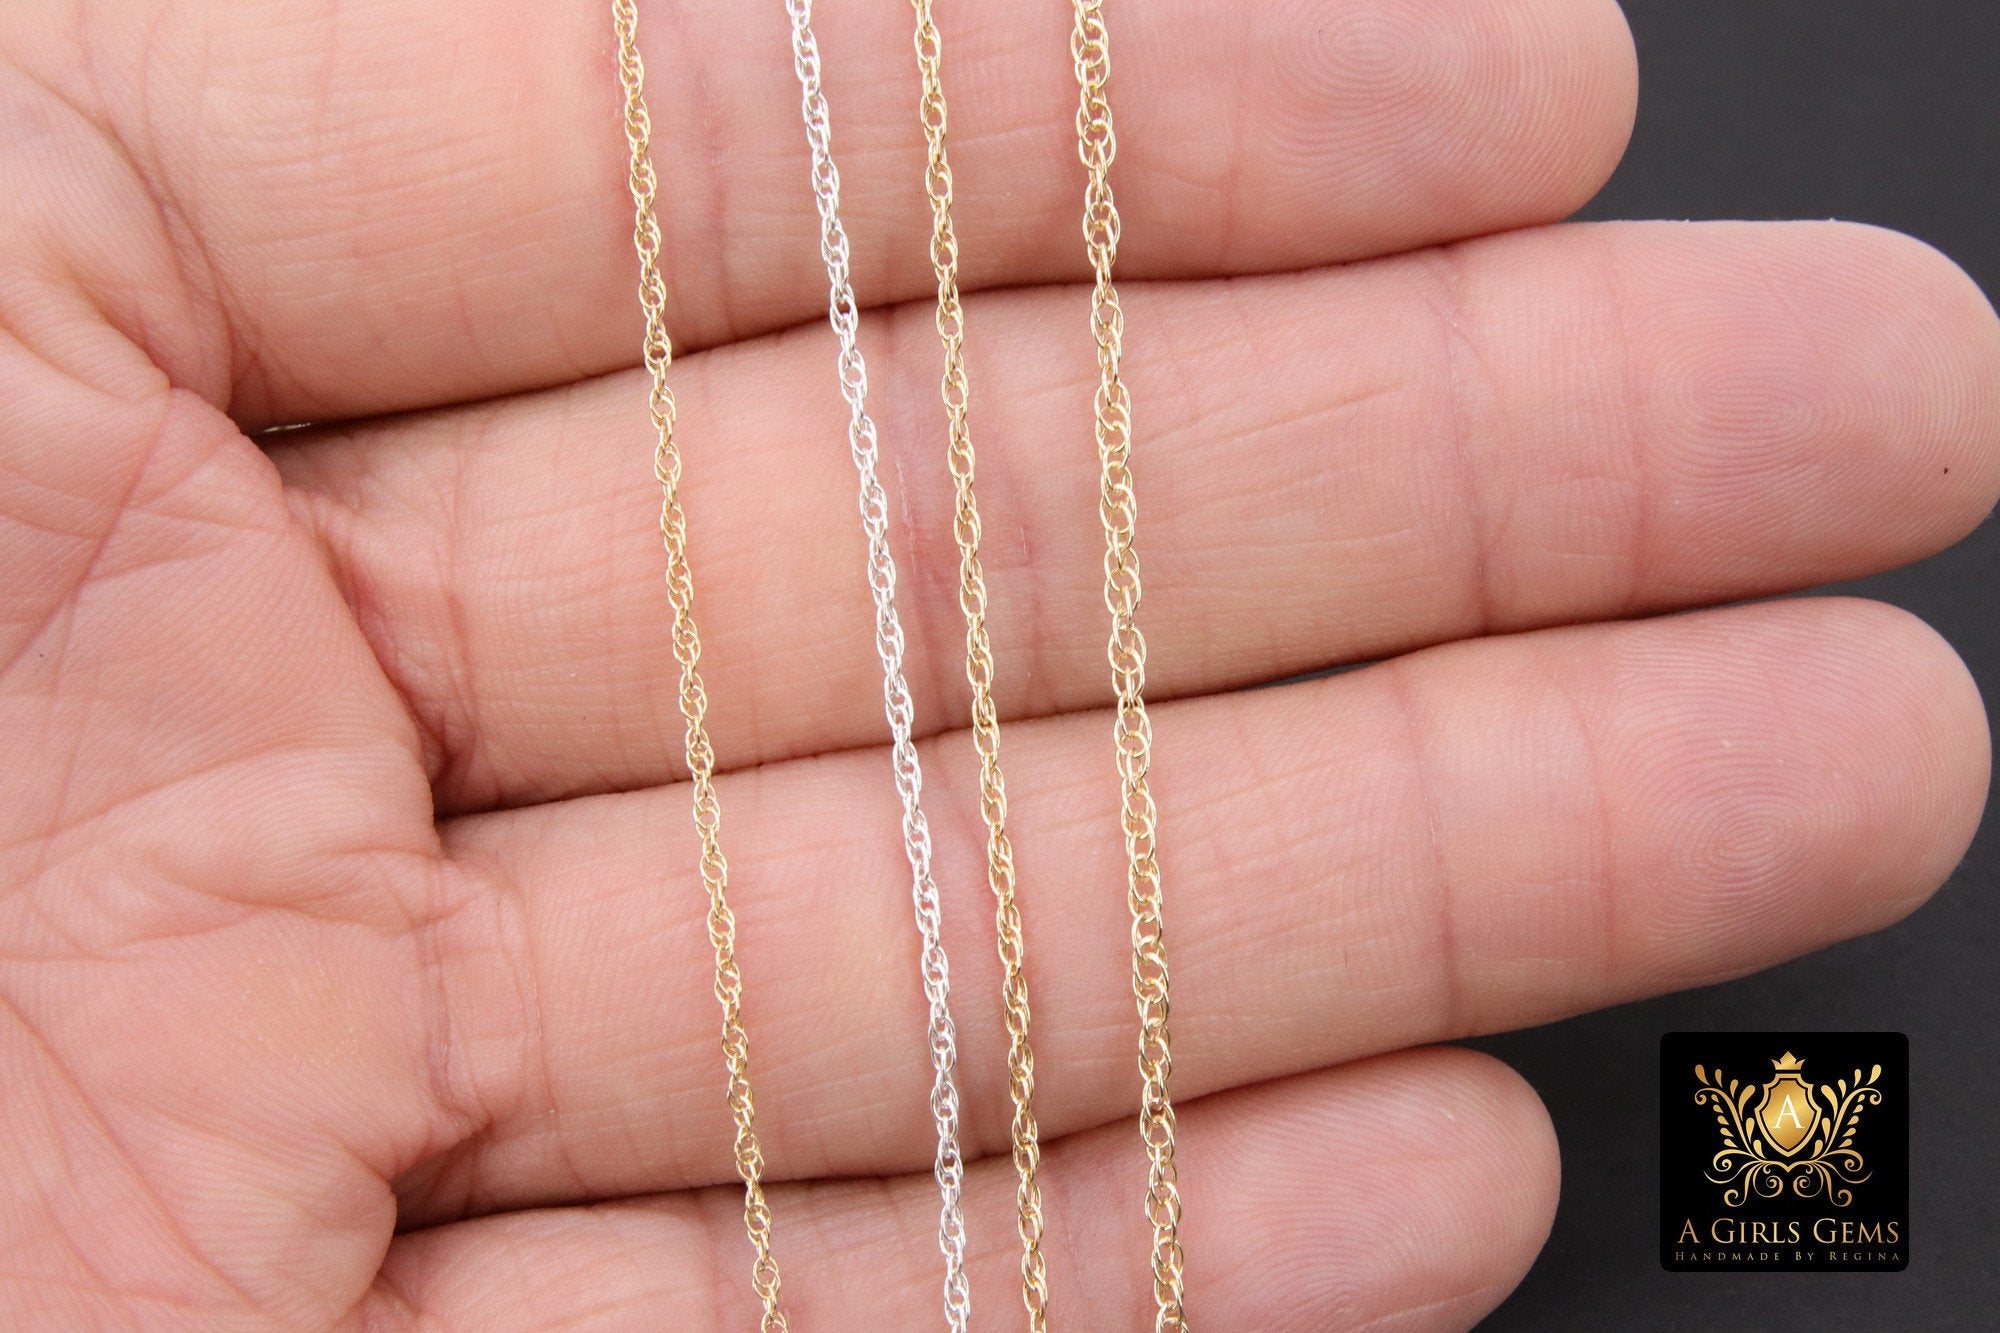 14 K Gold Filled Rope Jewelry Chain, 925 Sterling Silver CH #811, USA Gold 1.8 mm,1.5 mm